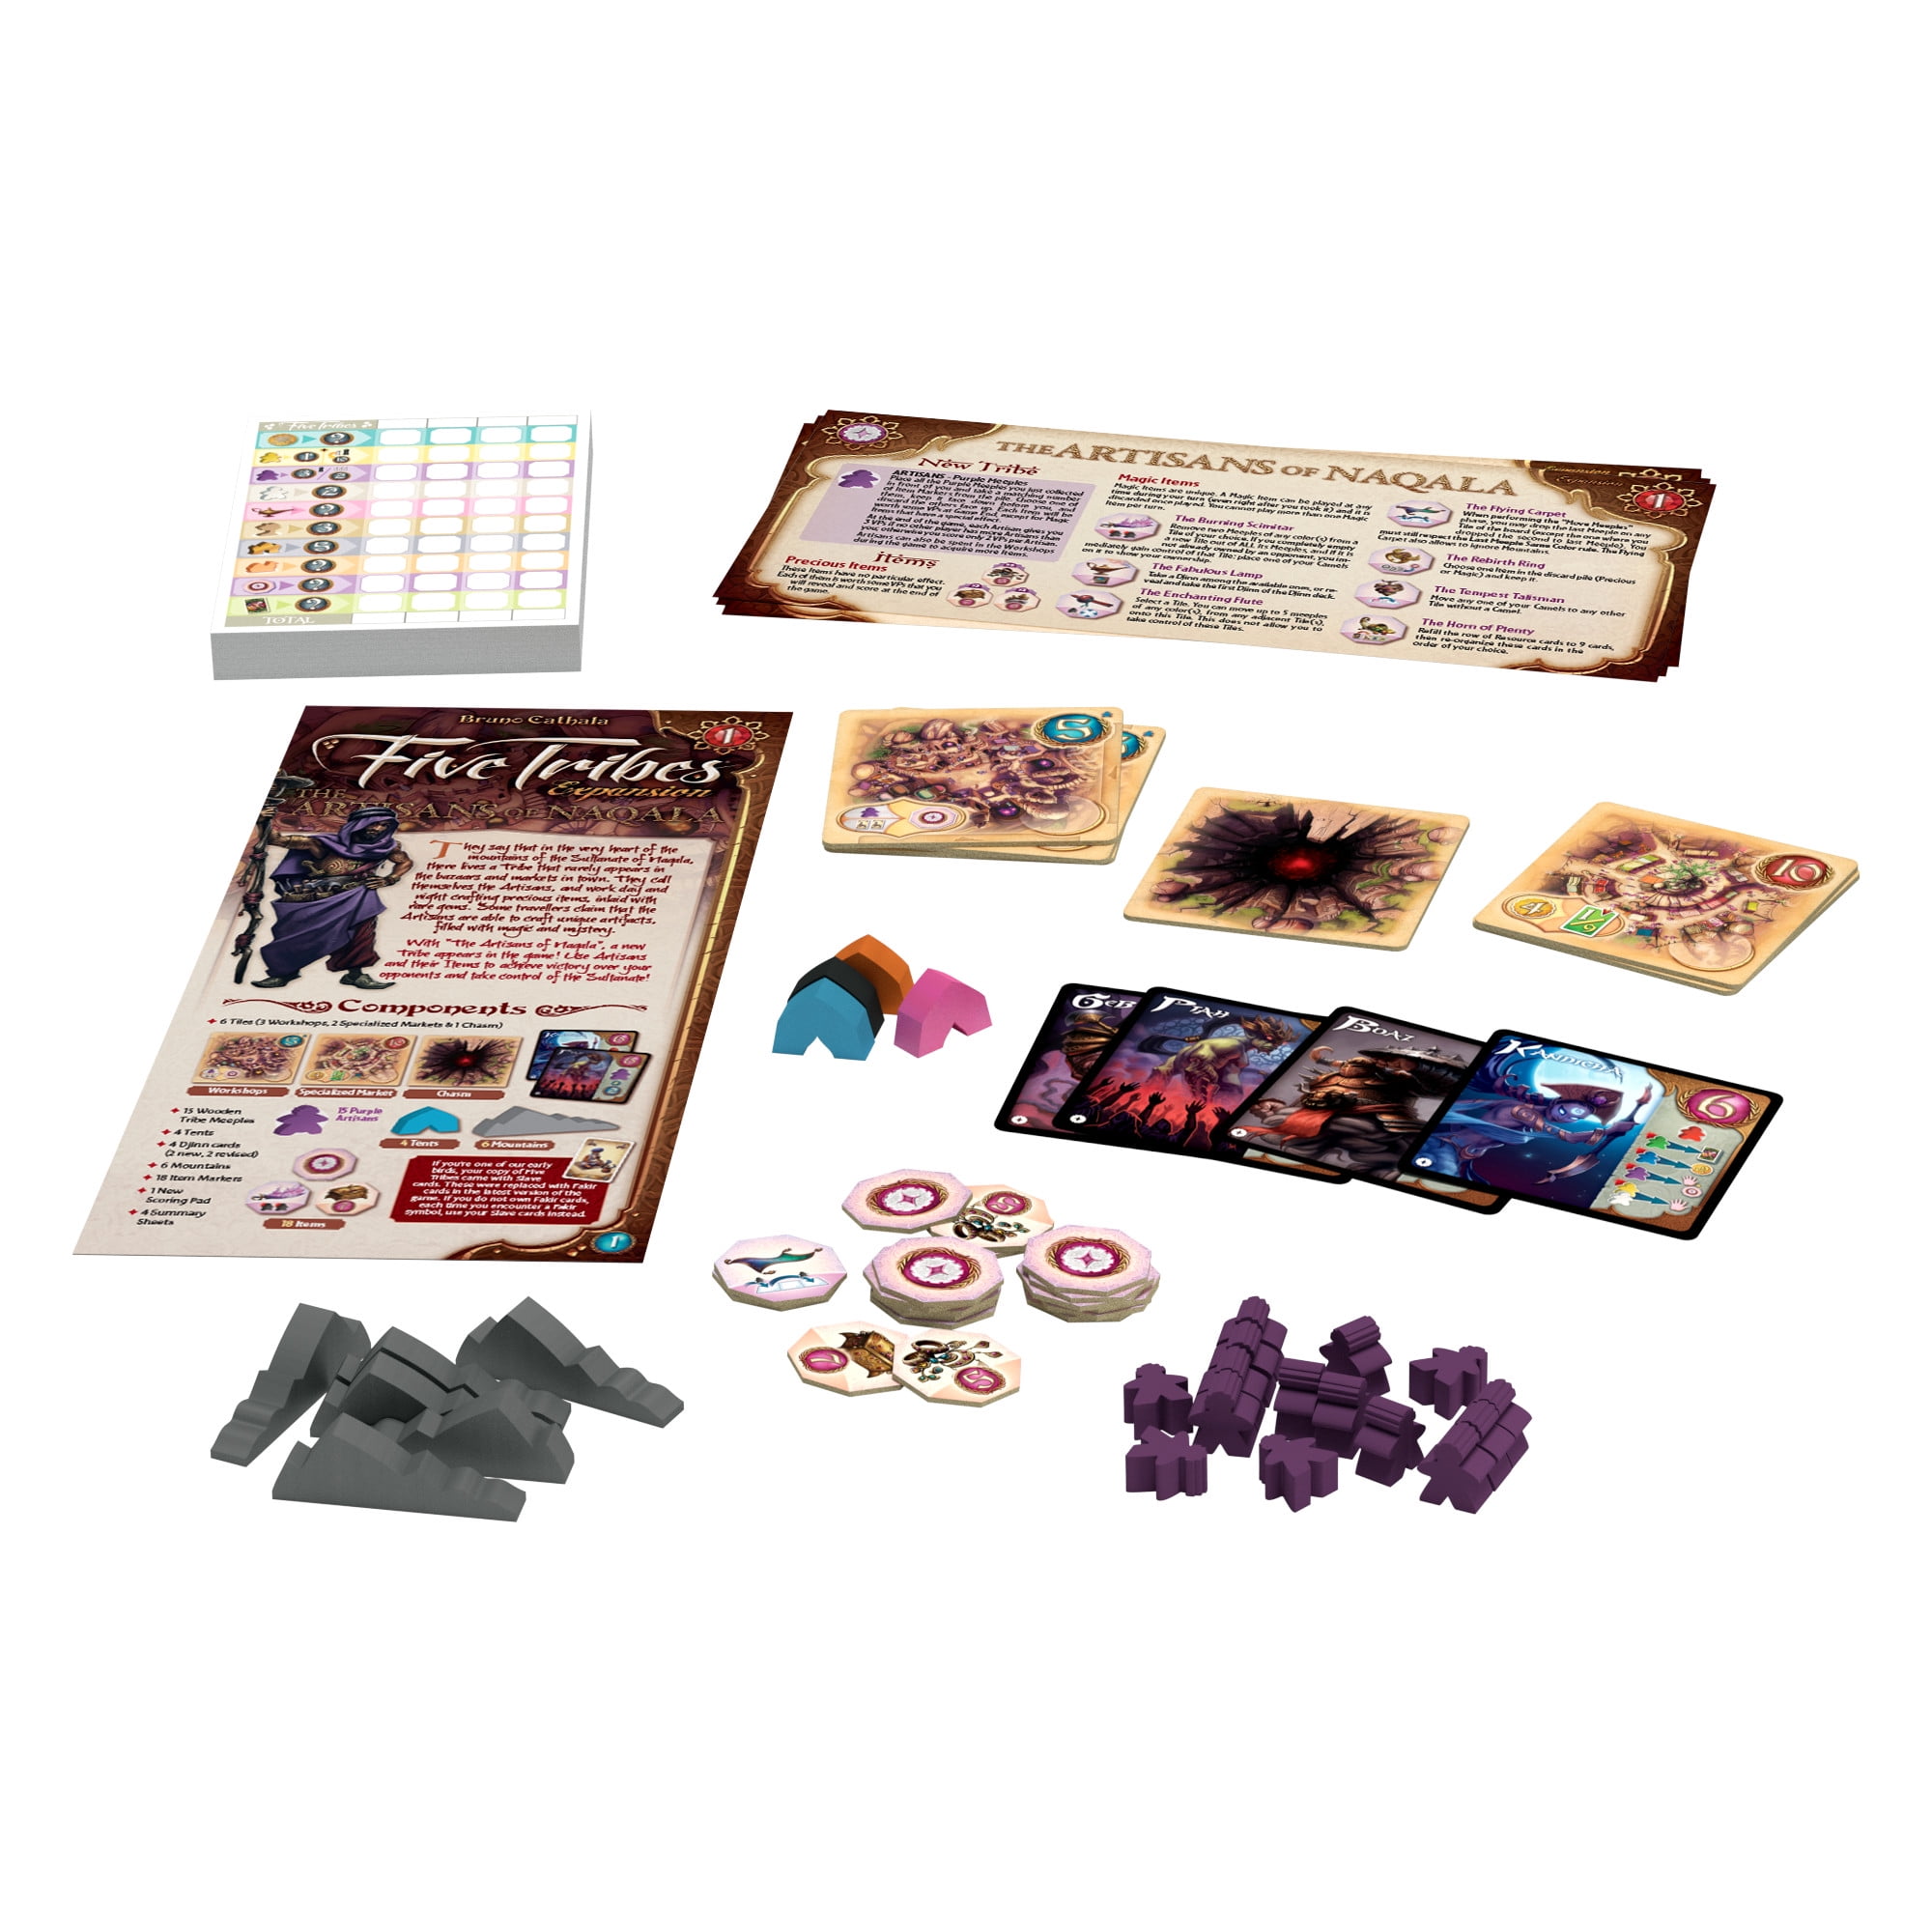 Five Tribes The Artisans of Naqala Board Game